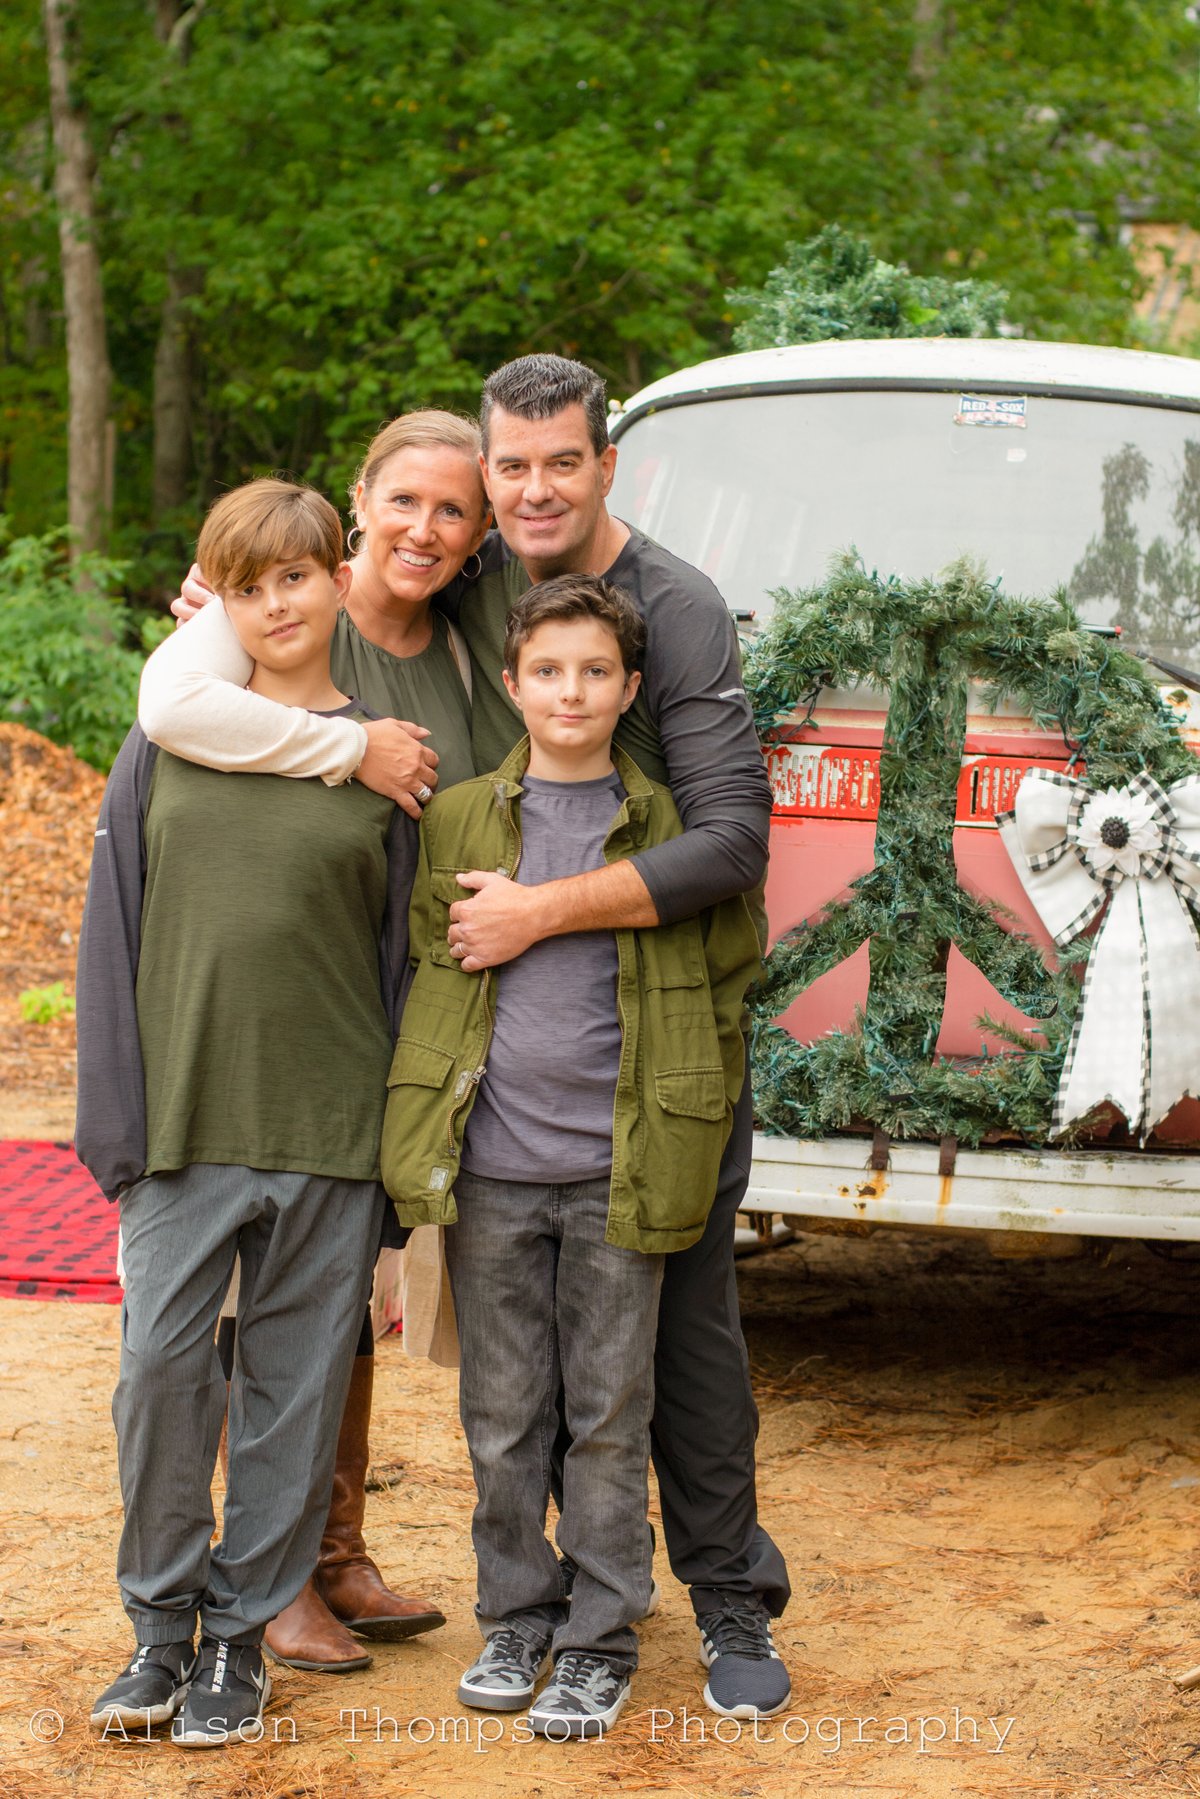 Image of VW Bus Christmas Mini Sessions - 10/12/20 - 20 minutes - 10 images - $175